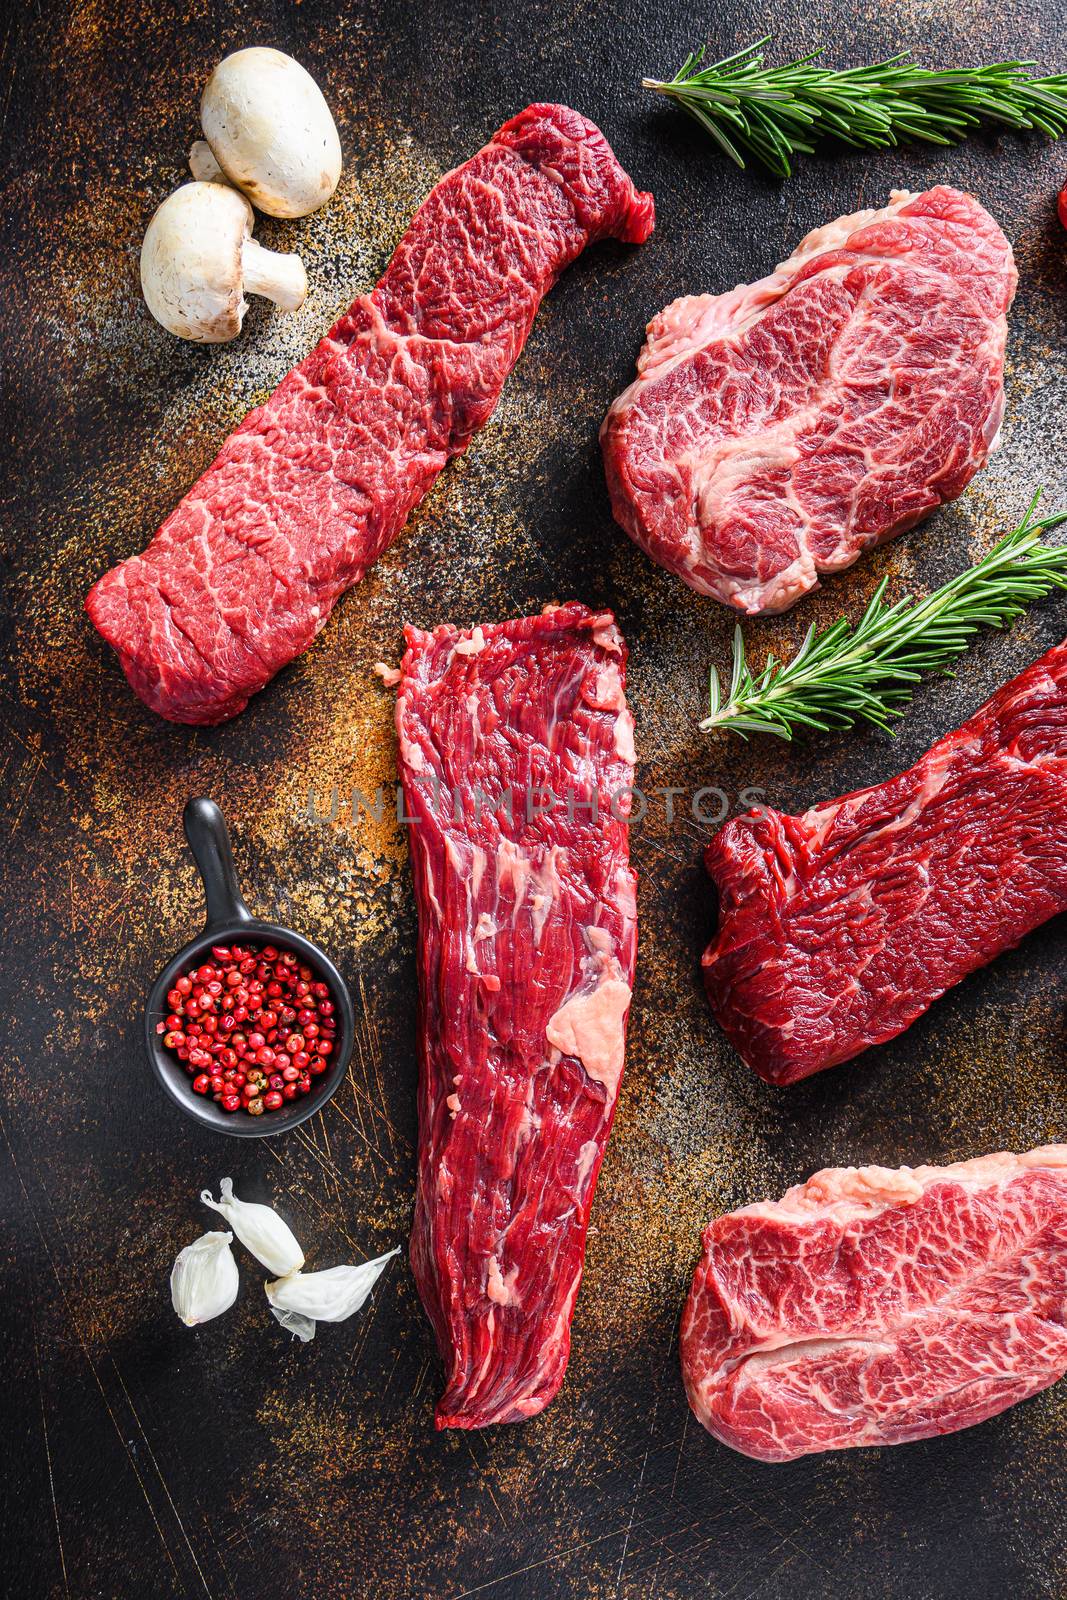 Organic set of raw alternative beef steaks flap flank Steak, machete steak or skirt cut, Top blade or flat iron beef and tri tip, triangle roast with denver cut side view over old rustic metal surface close up.